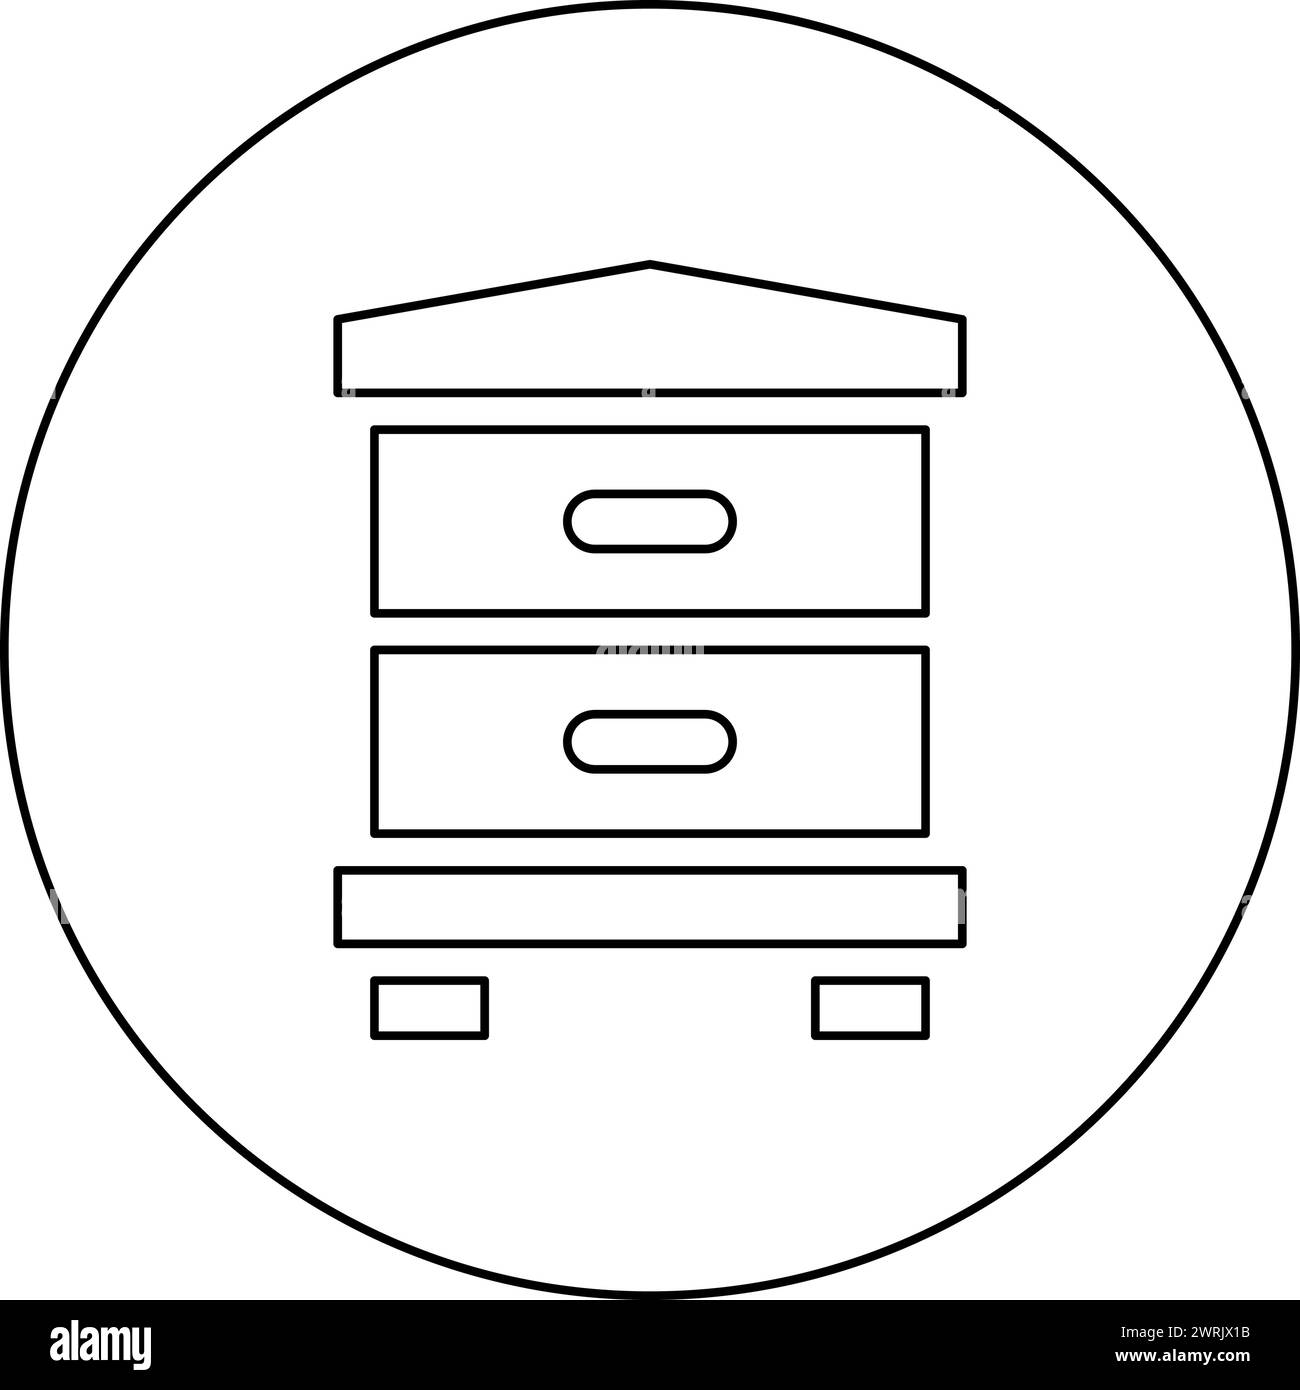 Hive bee house beehive apiary apiculture concept icon in circle round black color vector illustration image outline contour line thin style simple Stock Vector